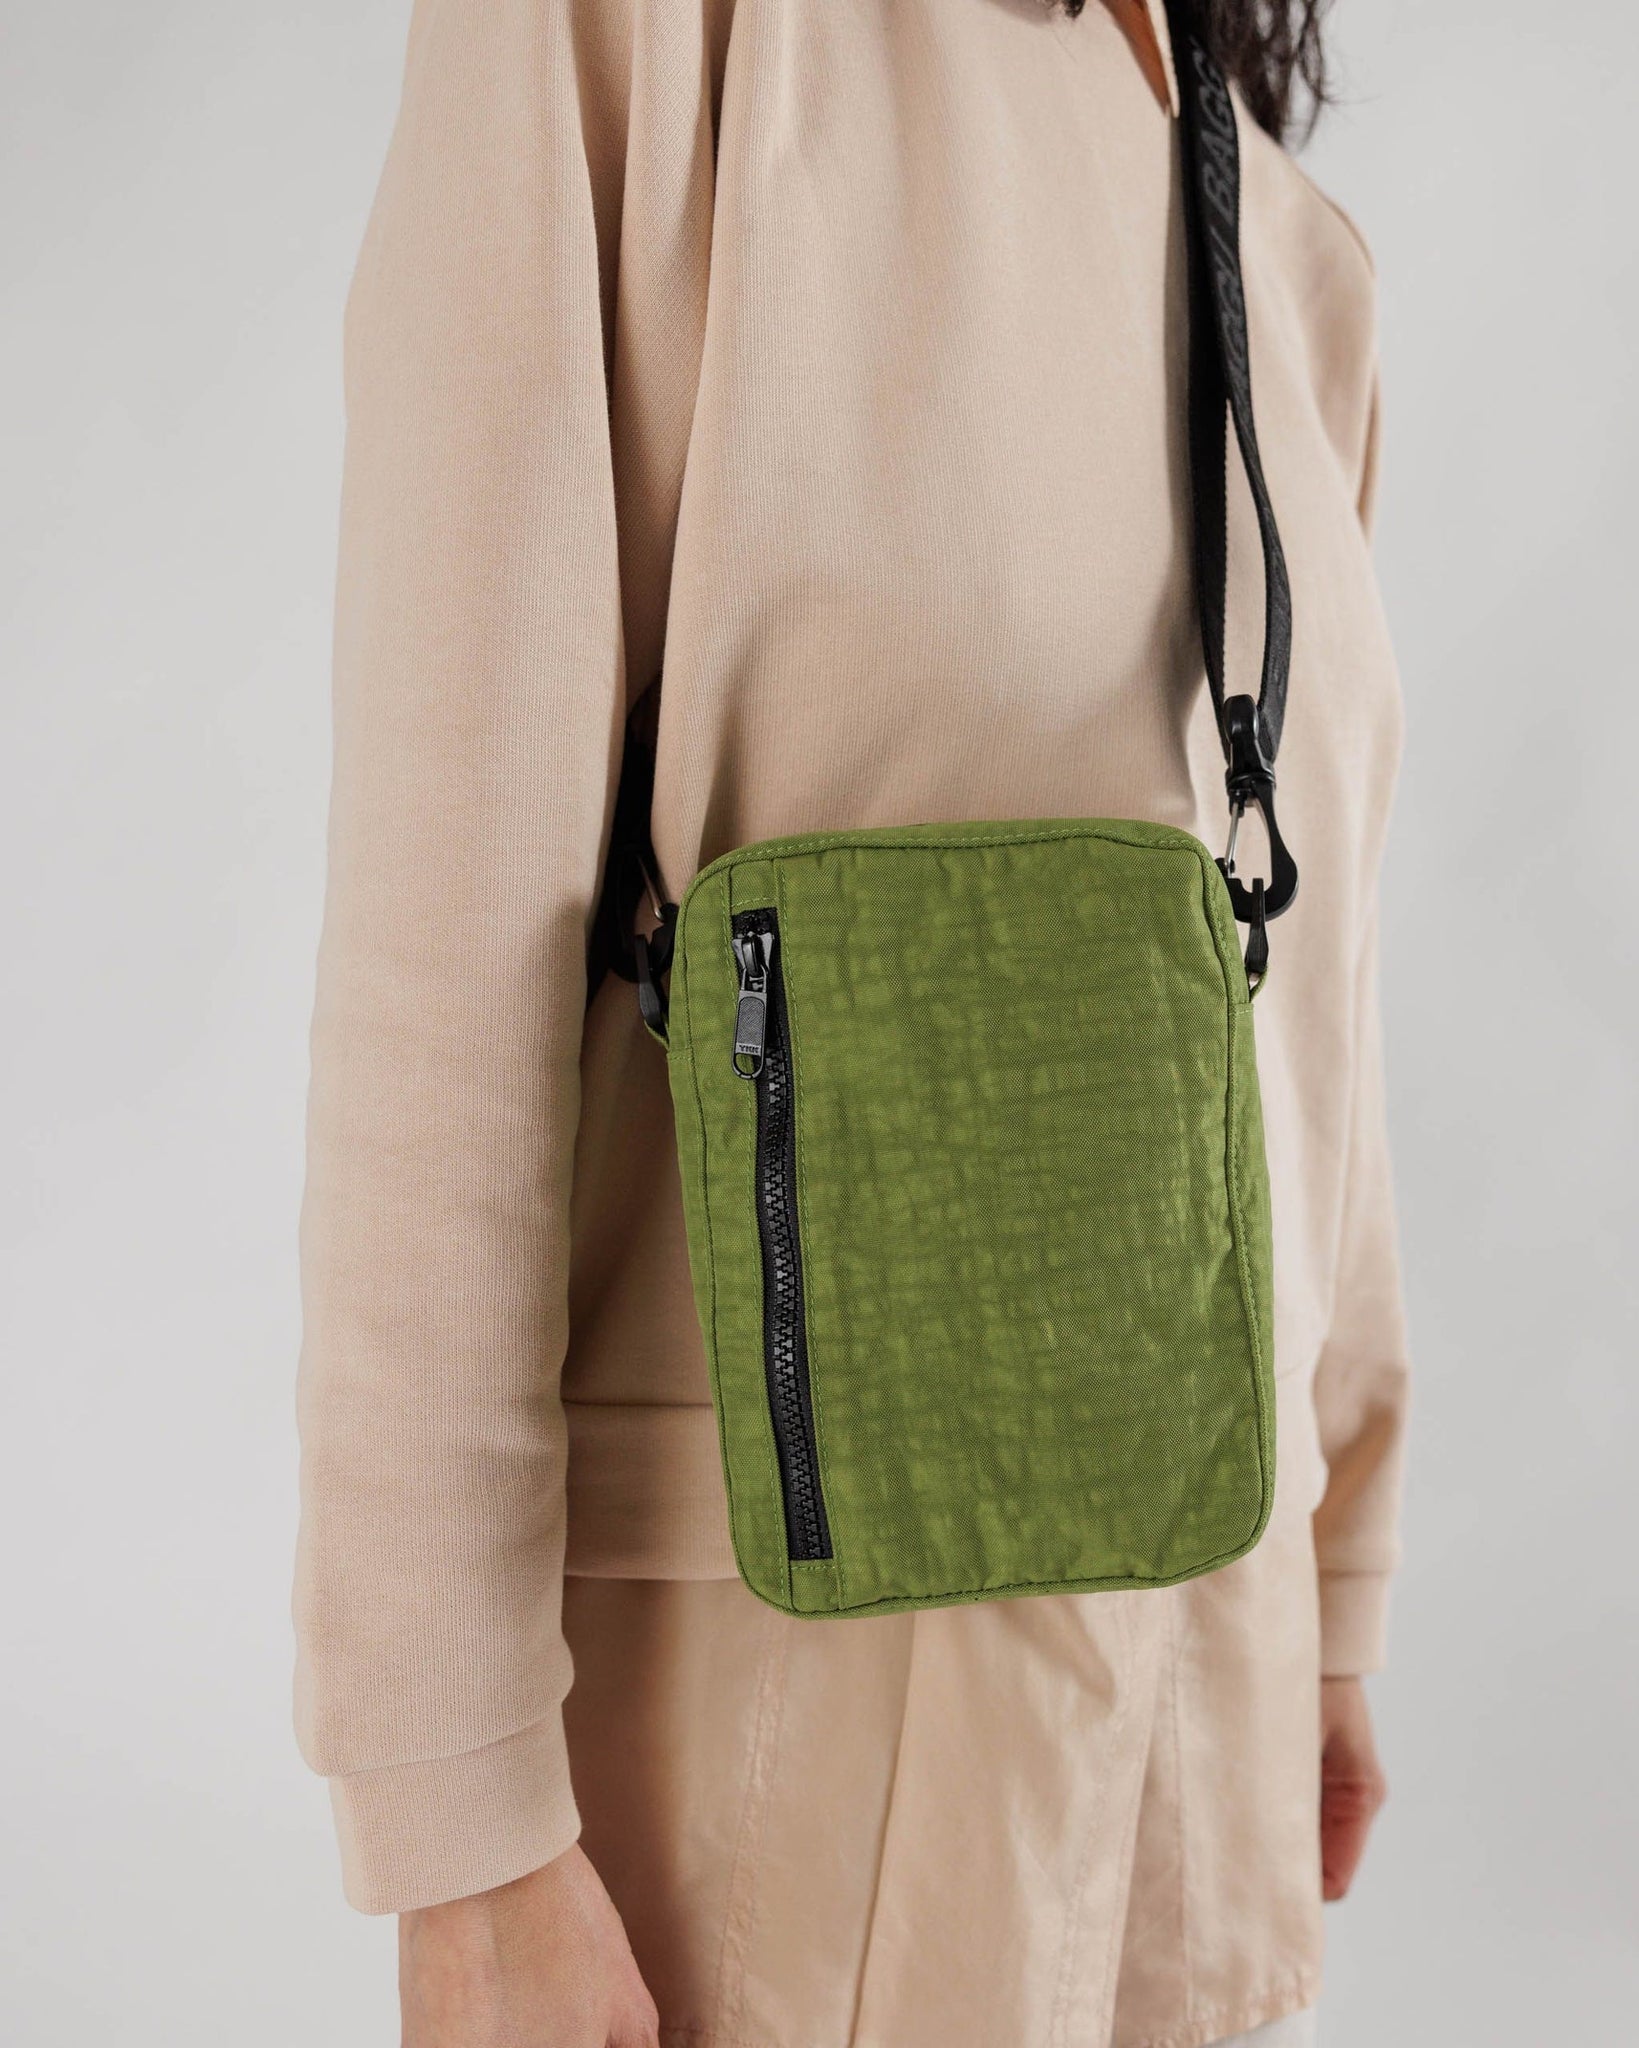 This Sporty Crossbody Bag Holds So Much More Than Youd Expect